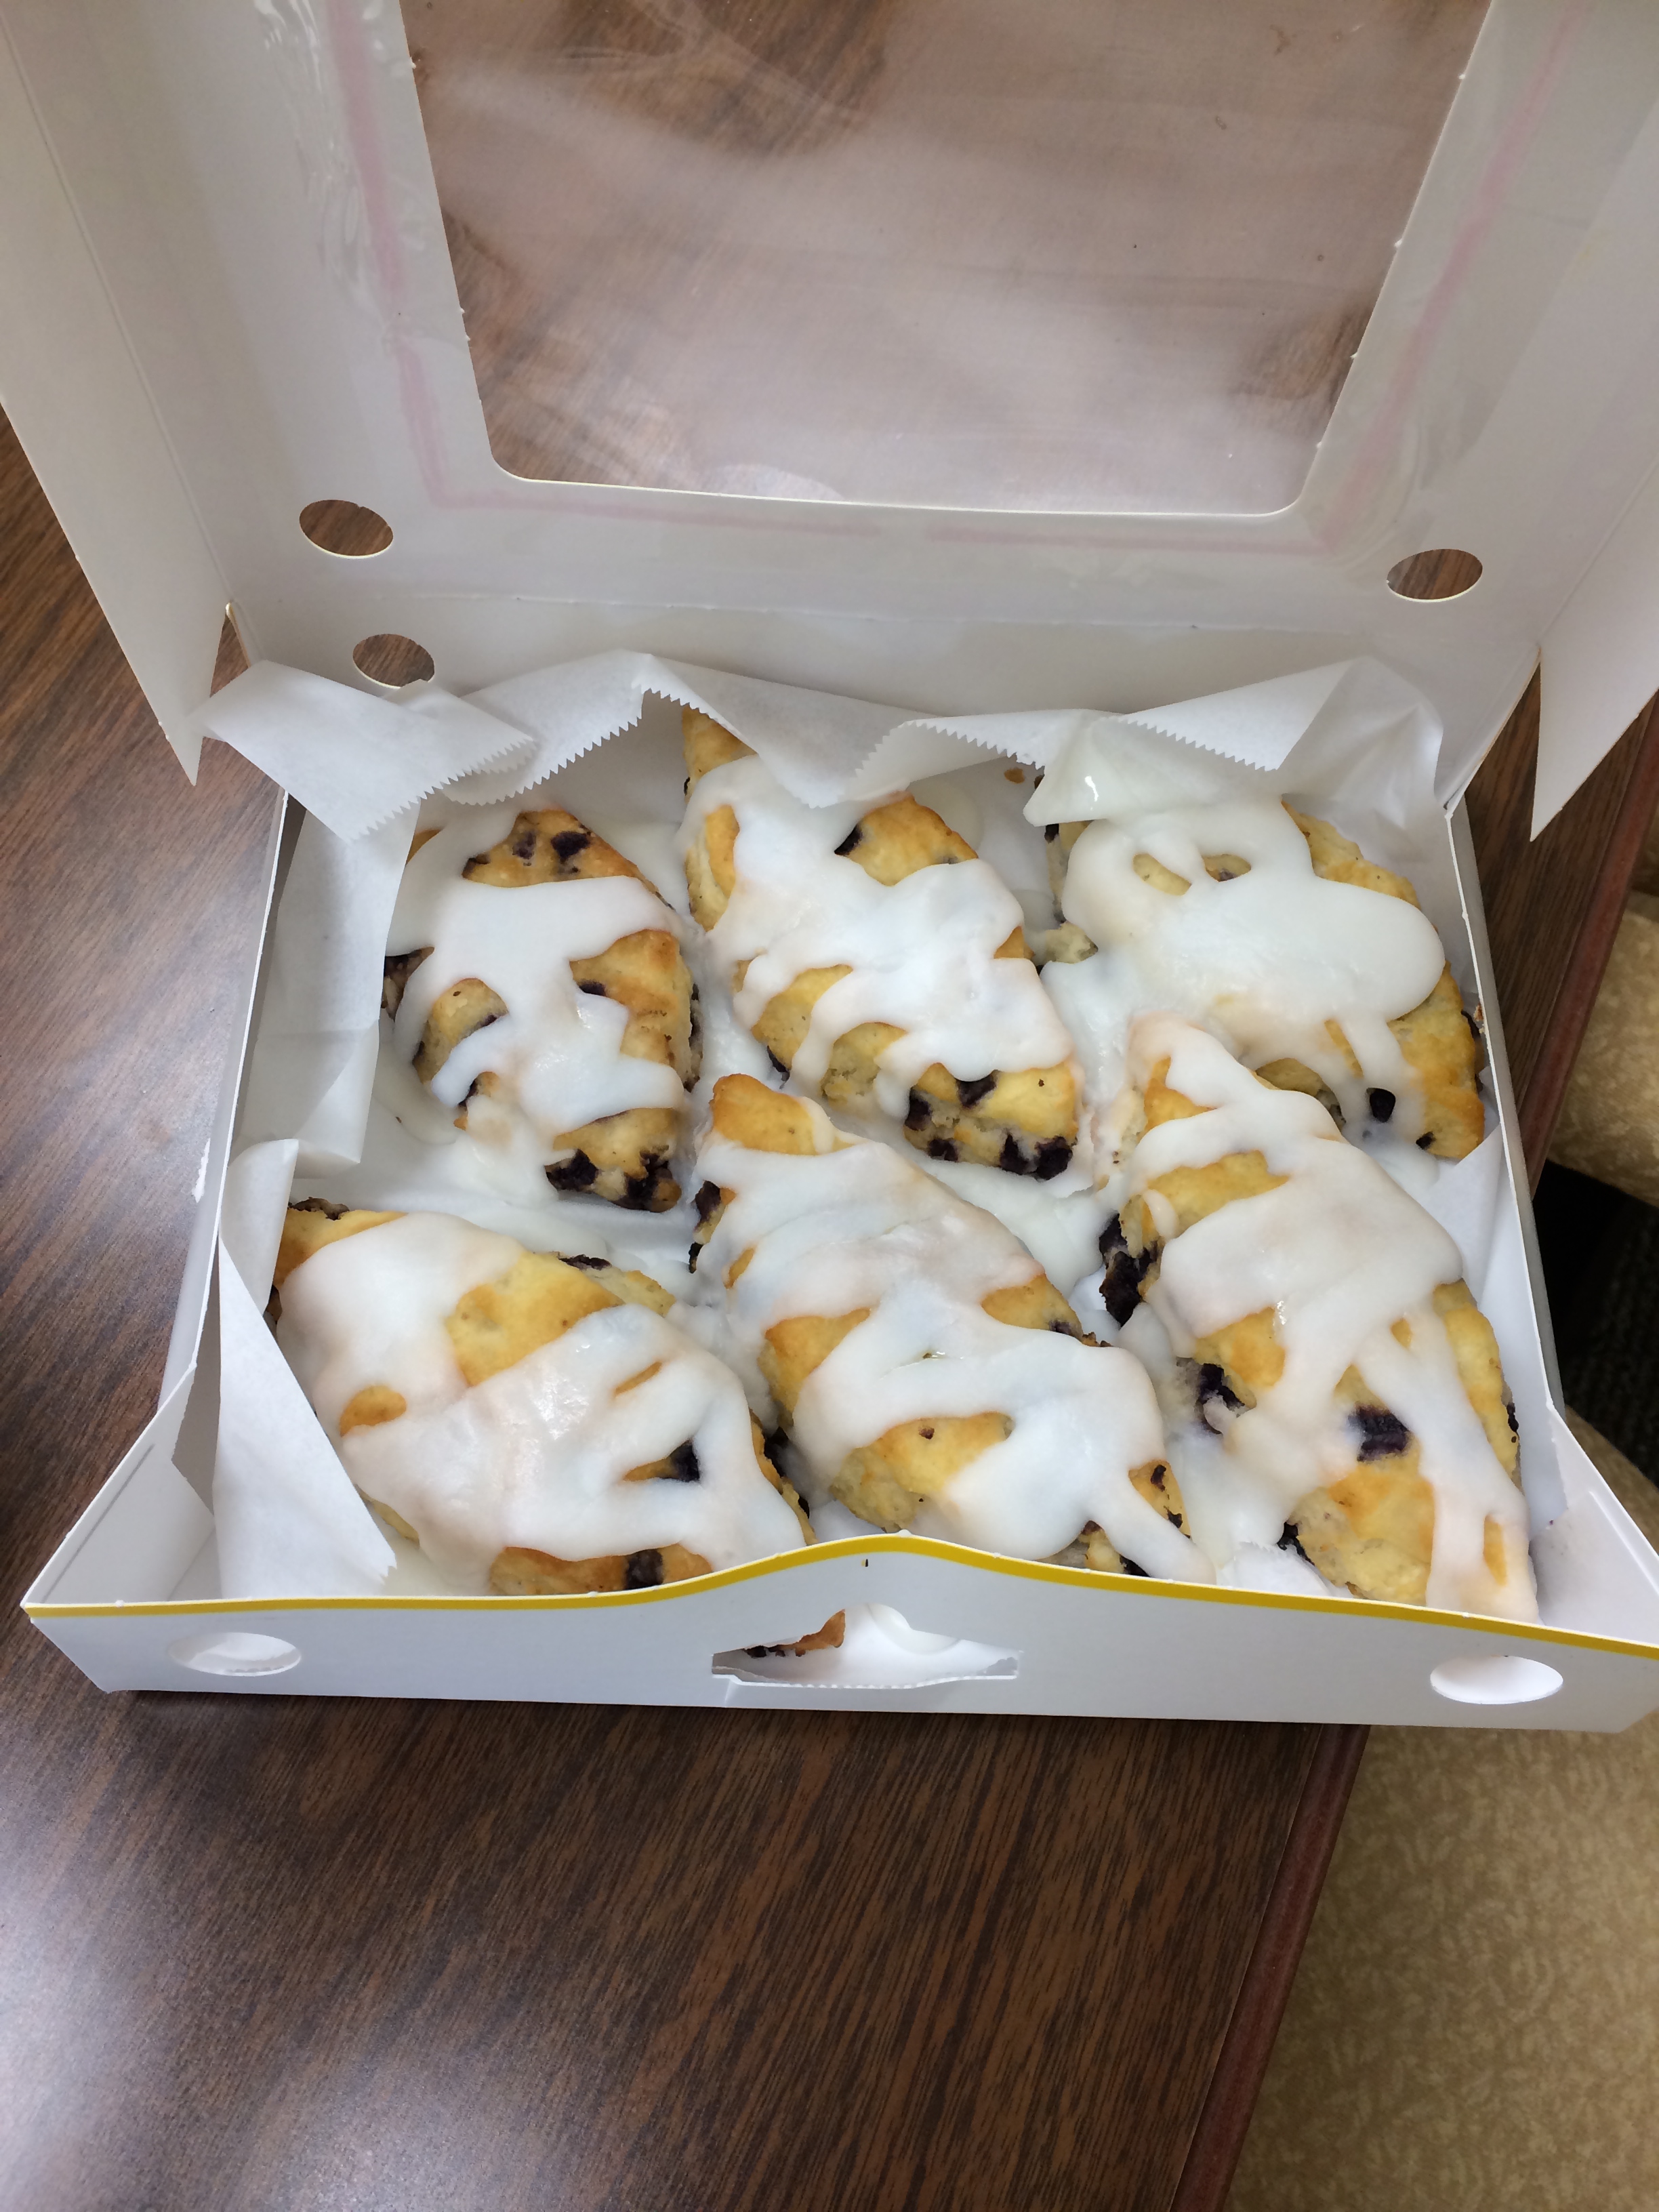 I took one of these Bo-Berry biscuits right out of this box!